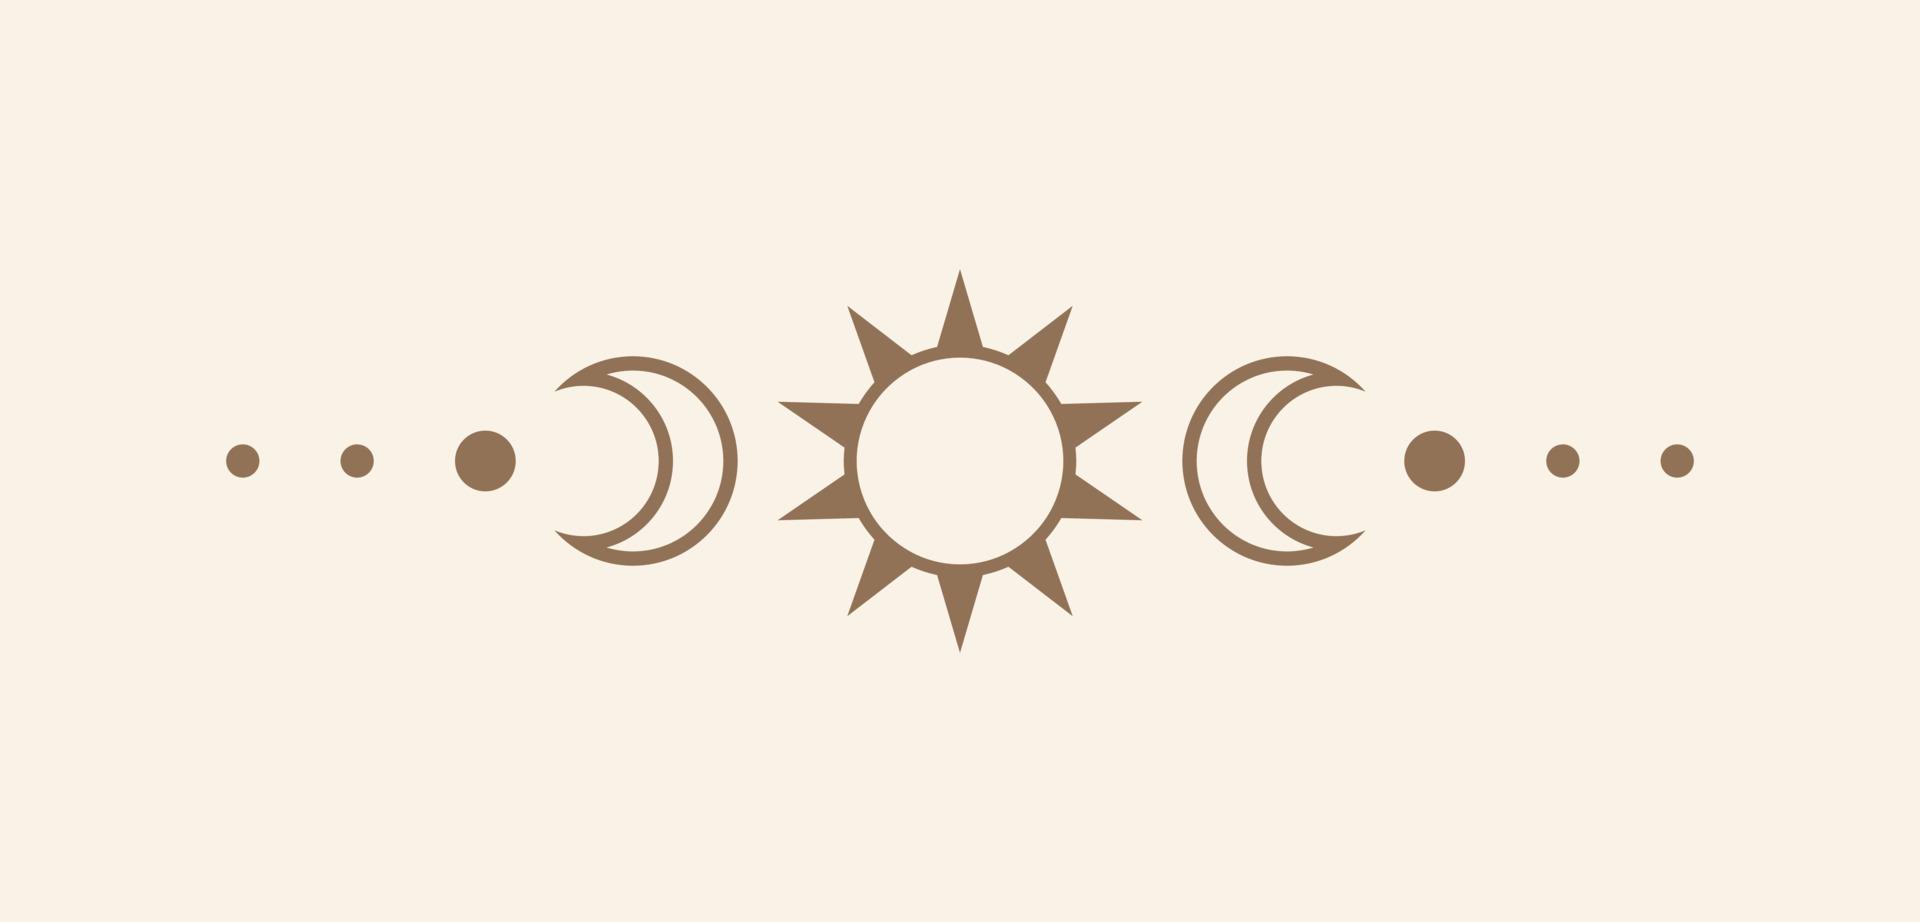 Celestial text divider with sun, stars, moon phases, crescents. Ornate boho mystic separator decorative element vector